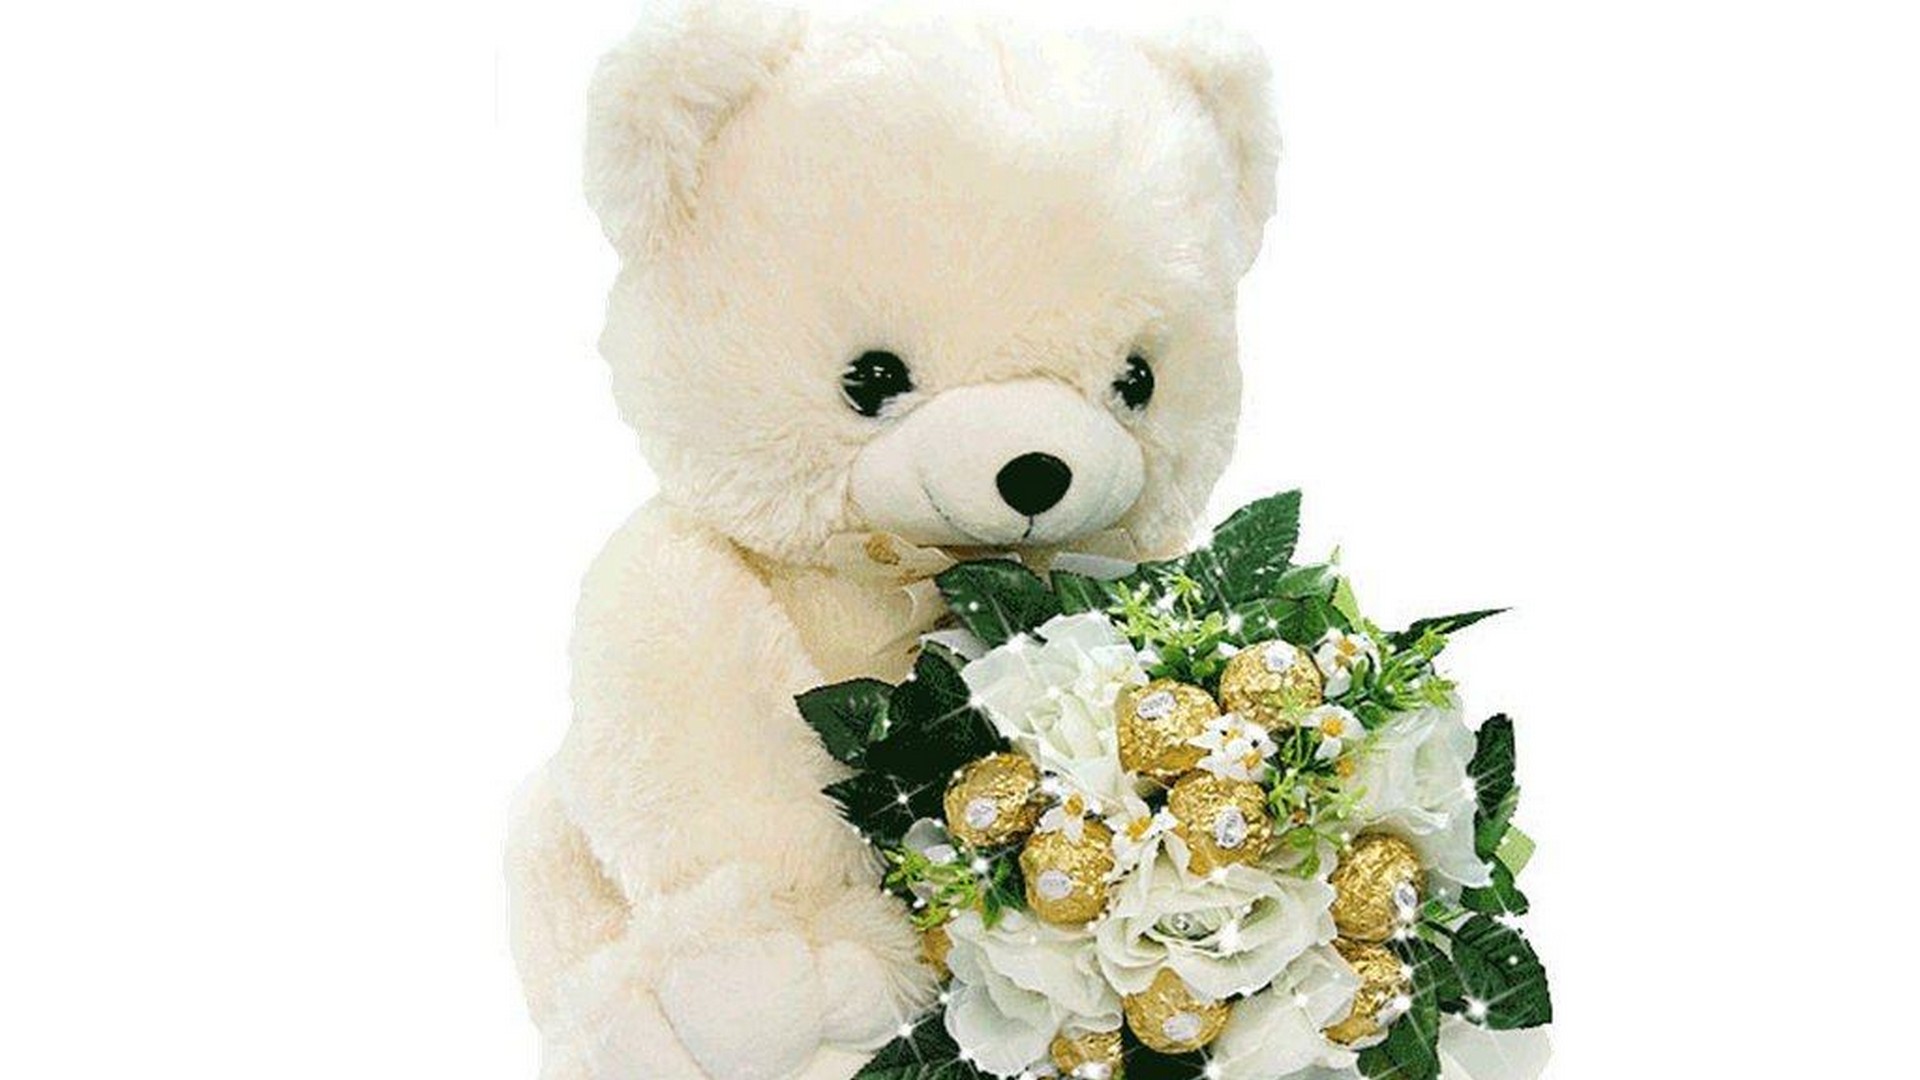 Giant Teddy Bear Wallpaper Hd With Image Resolution - Gif White Teddy Bear - HD Wallpaper 